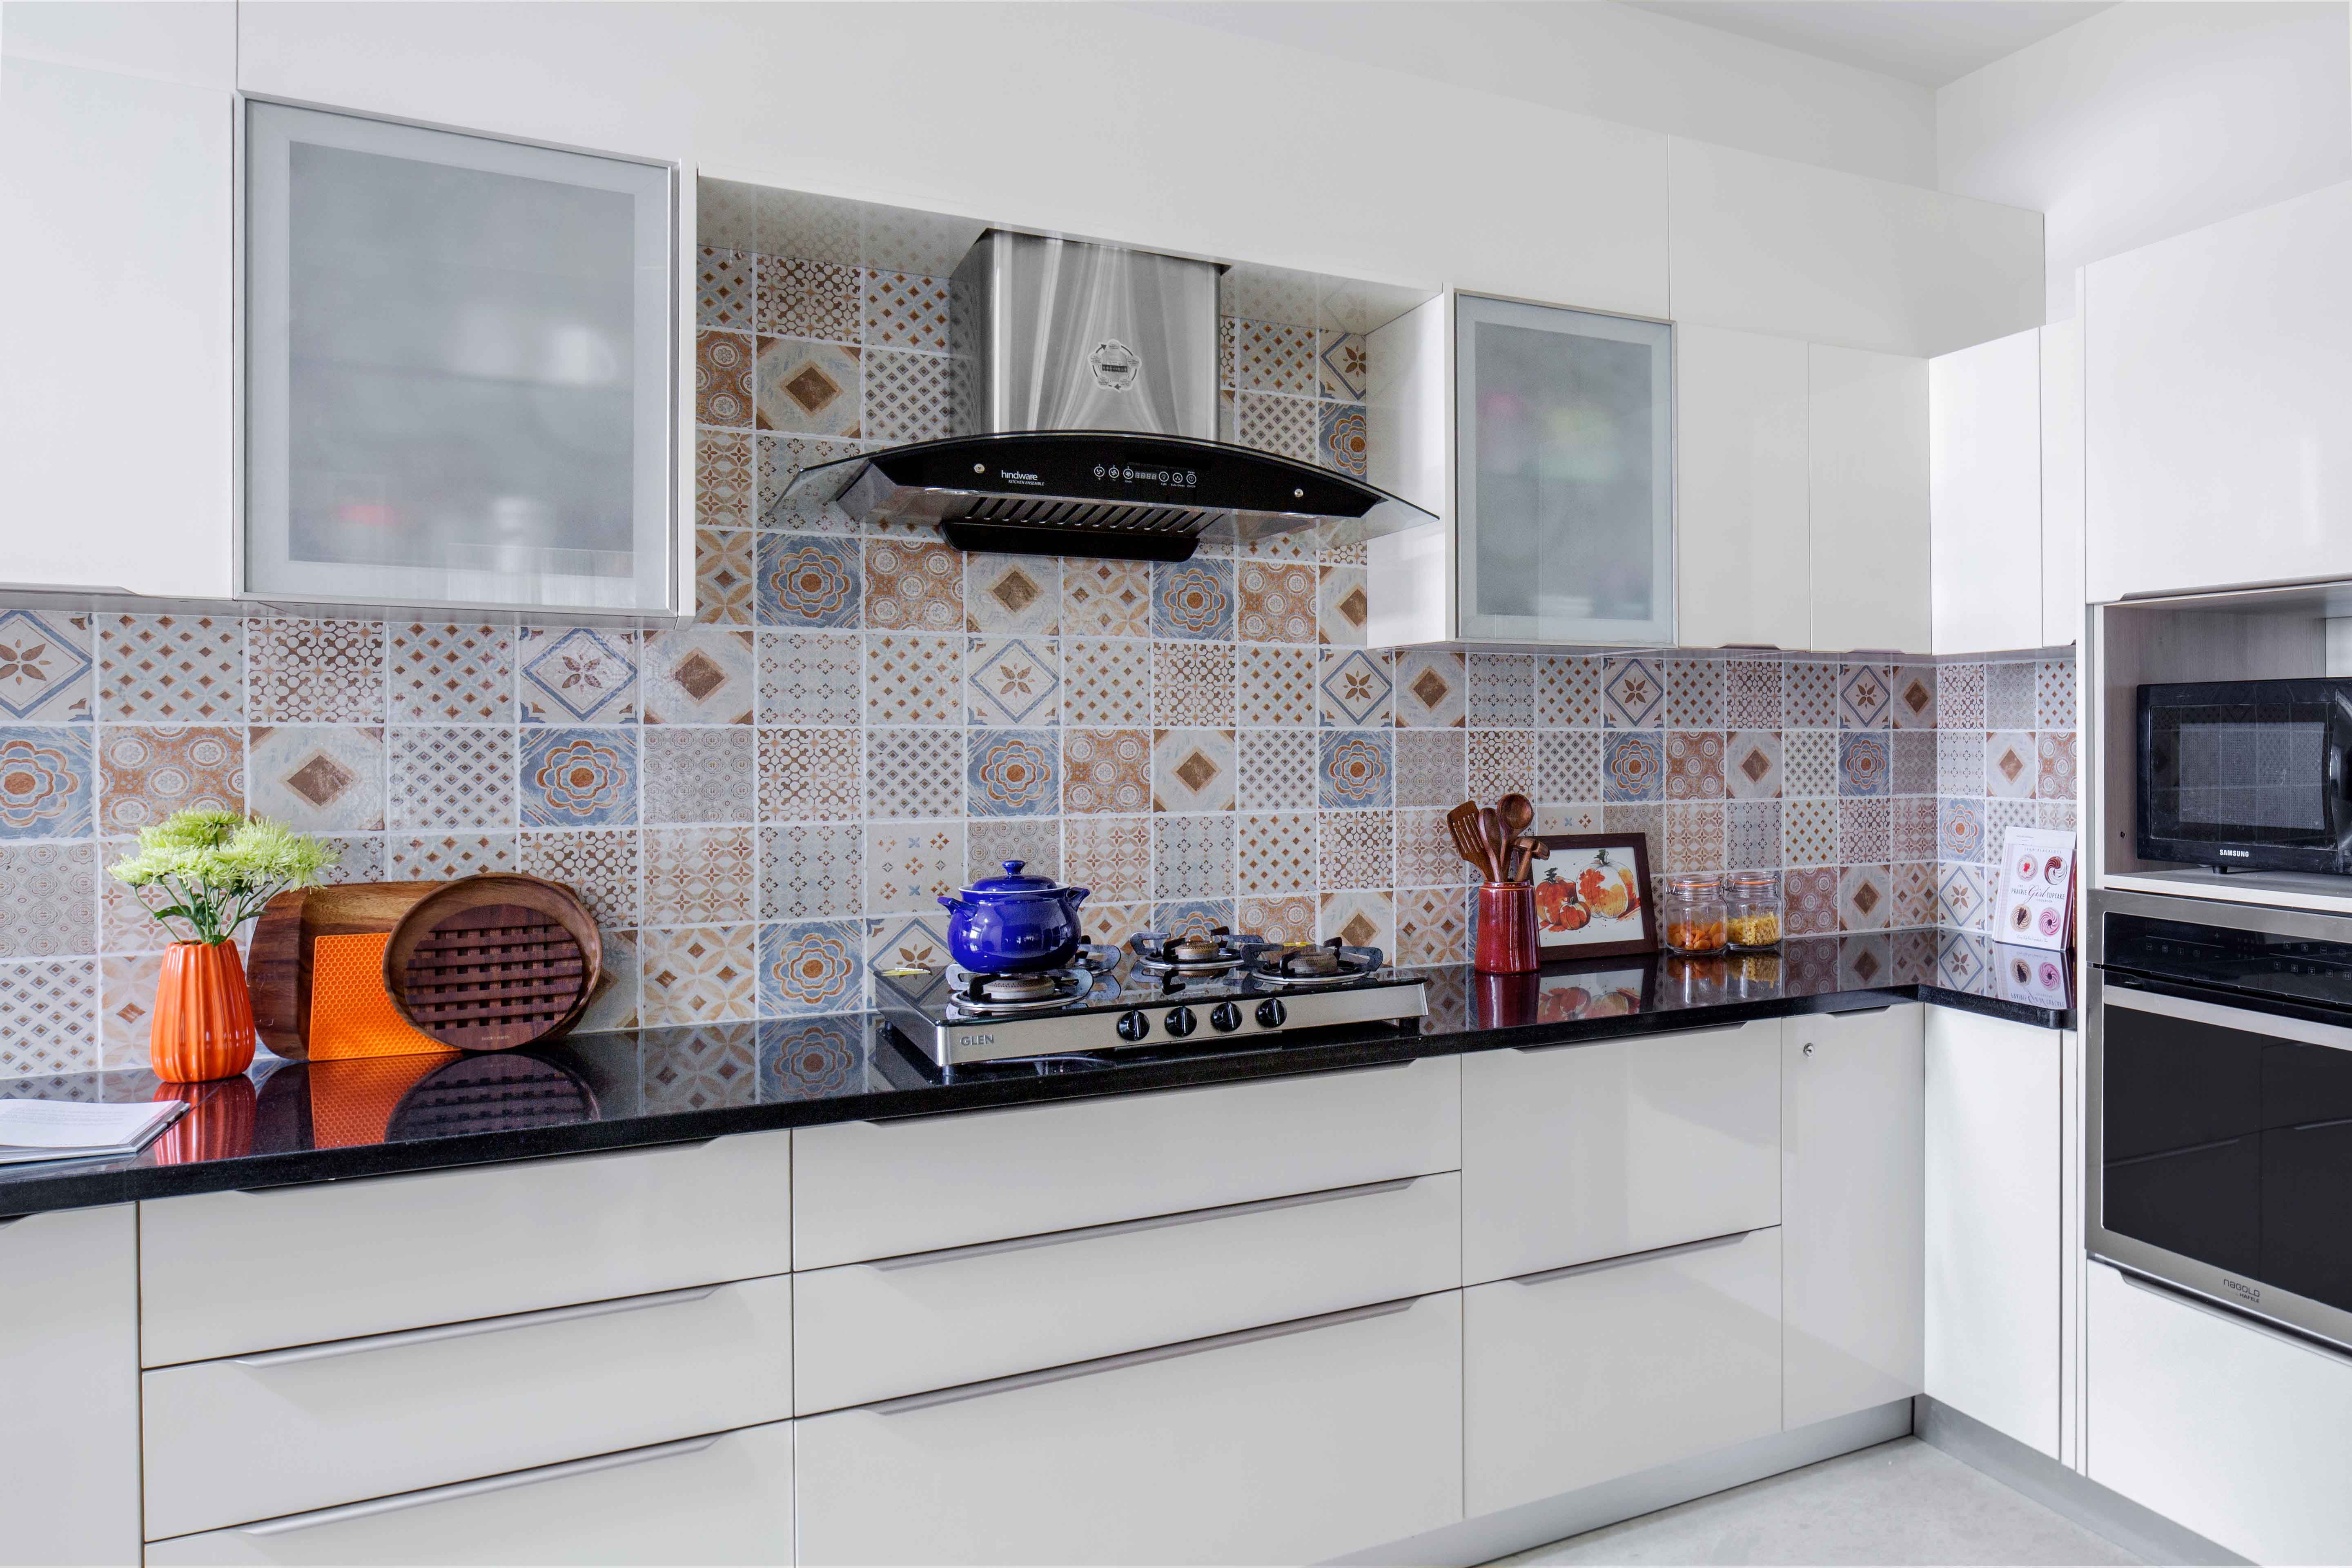 Classic 2-BHK Flat In Bangalore With White L-Shaped Kitchen Design